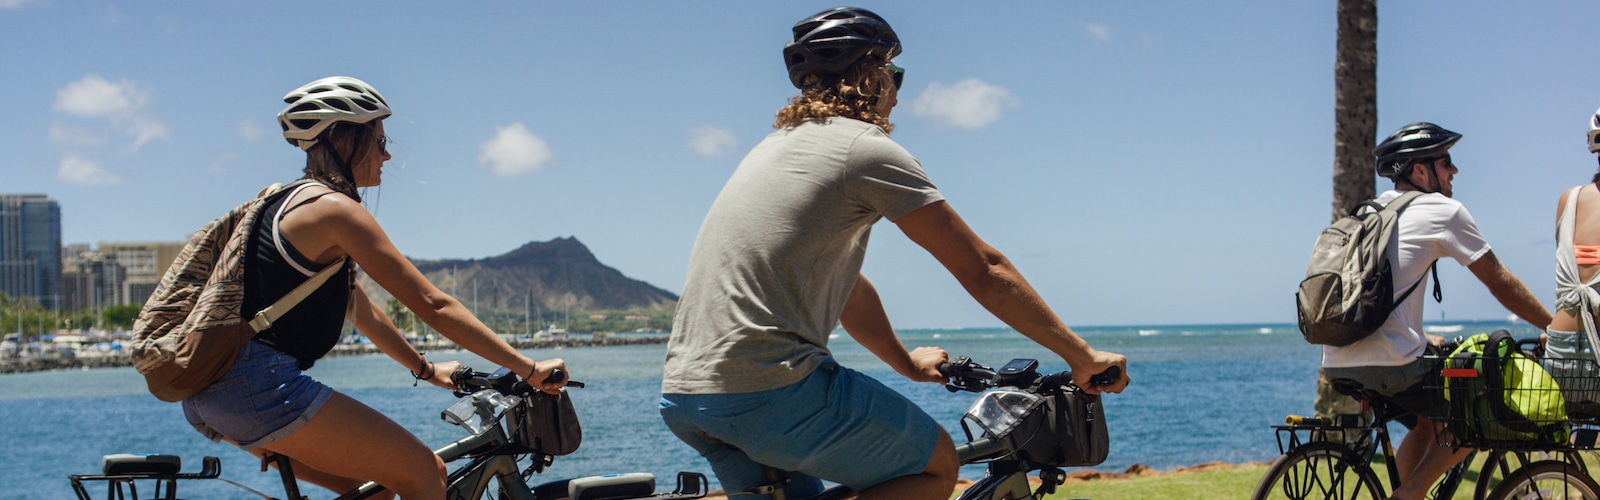 Oahu Bicycle Tours, Best Oahu Tours & Activities